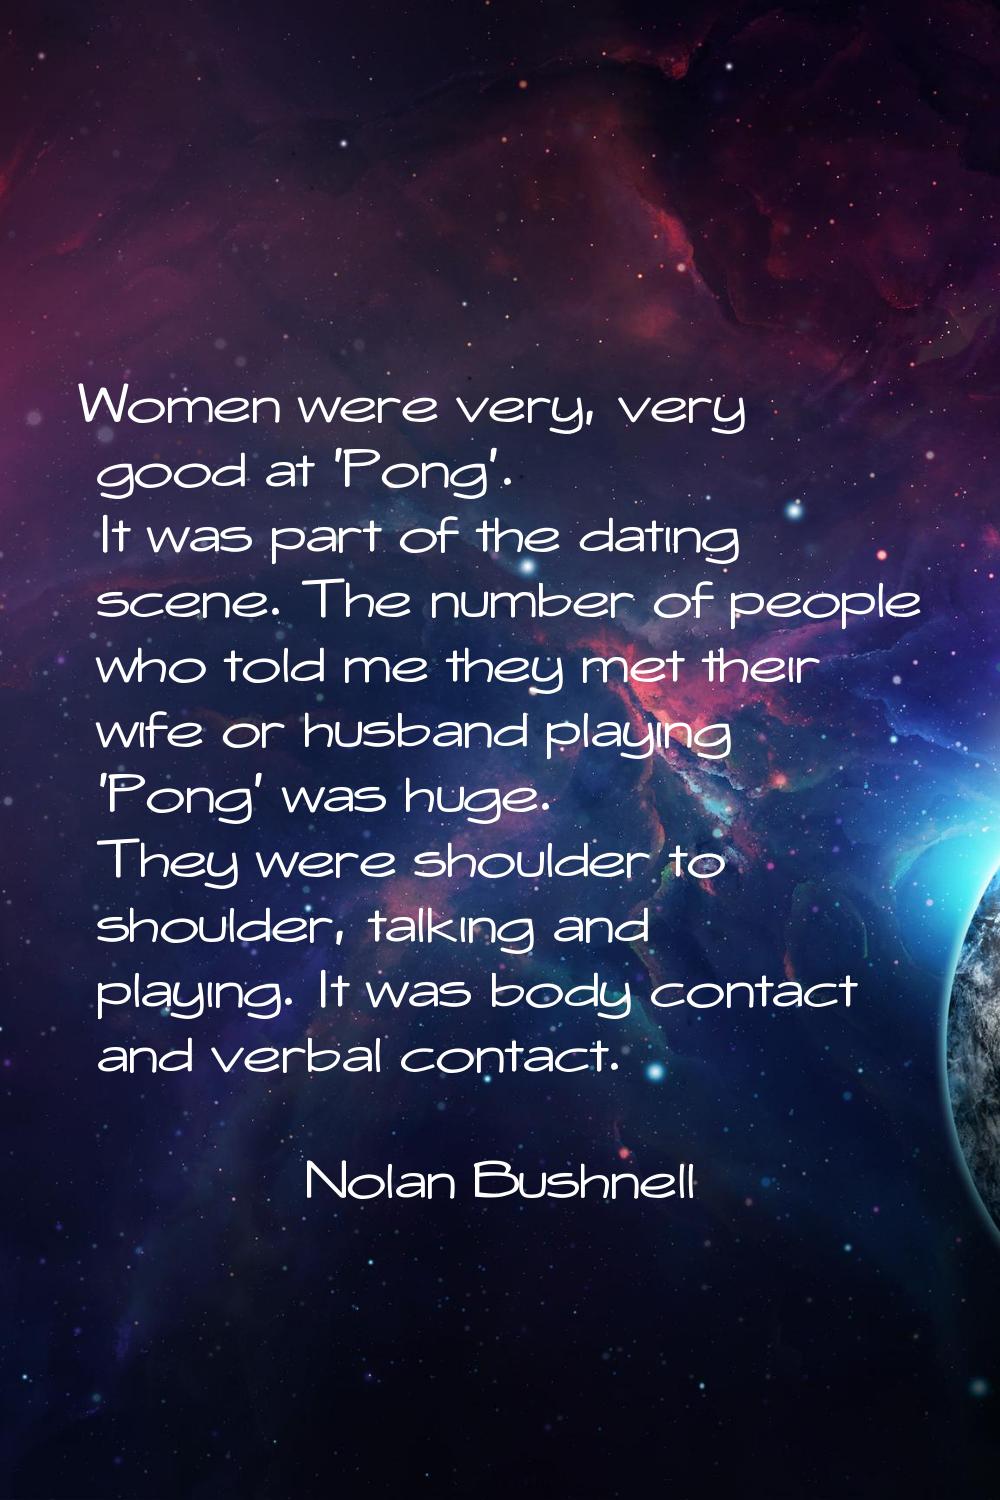 Women were very, very good at 'Pong'. It was part of the dating scene. The number of people who tol